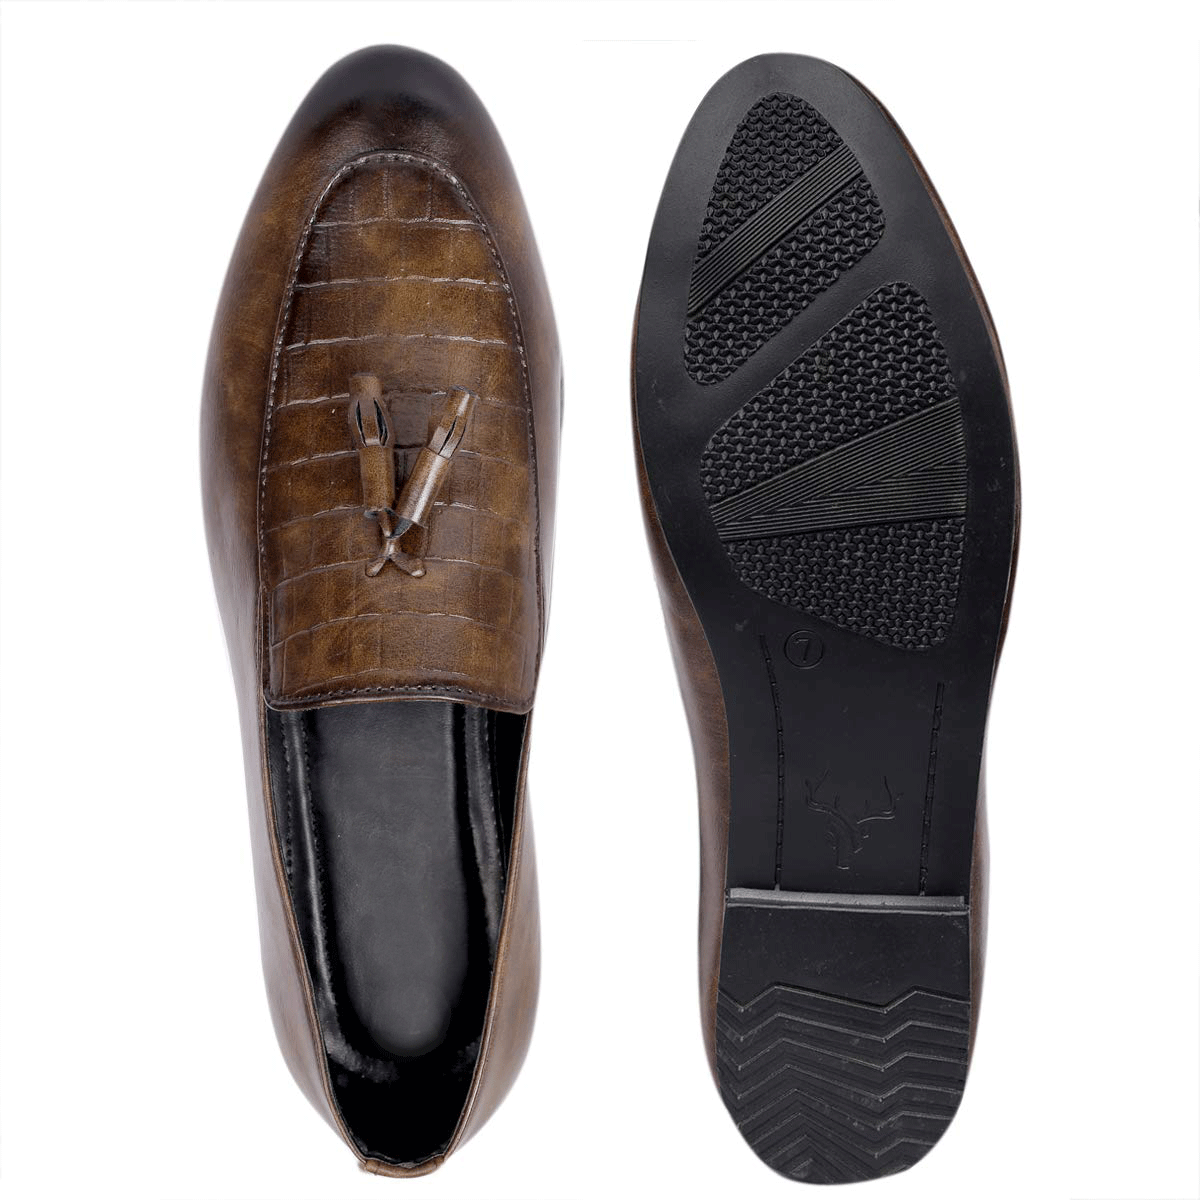 Basic Design Casual Pu Leather Tassel Loafer & Moccasins Shoes For Men's-JonasParamount